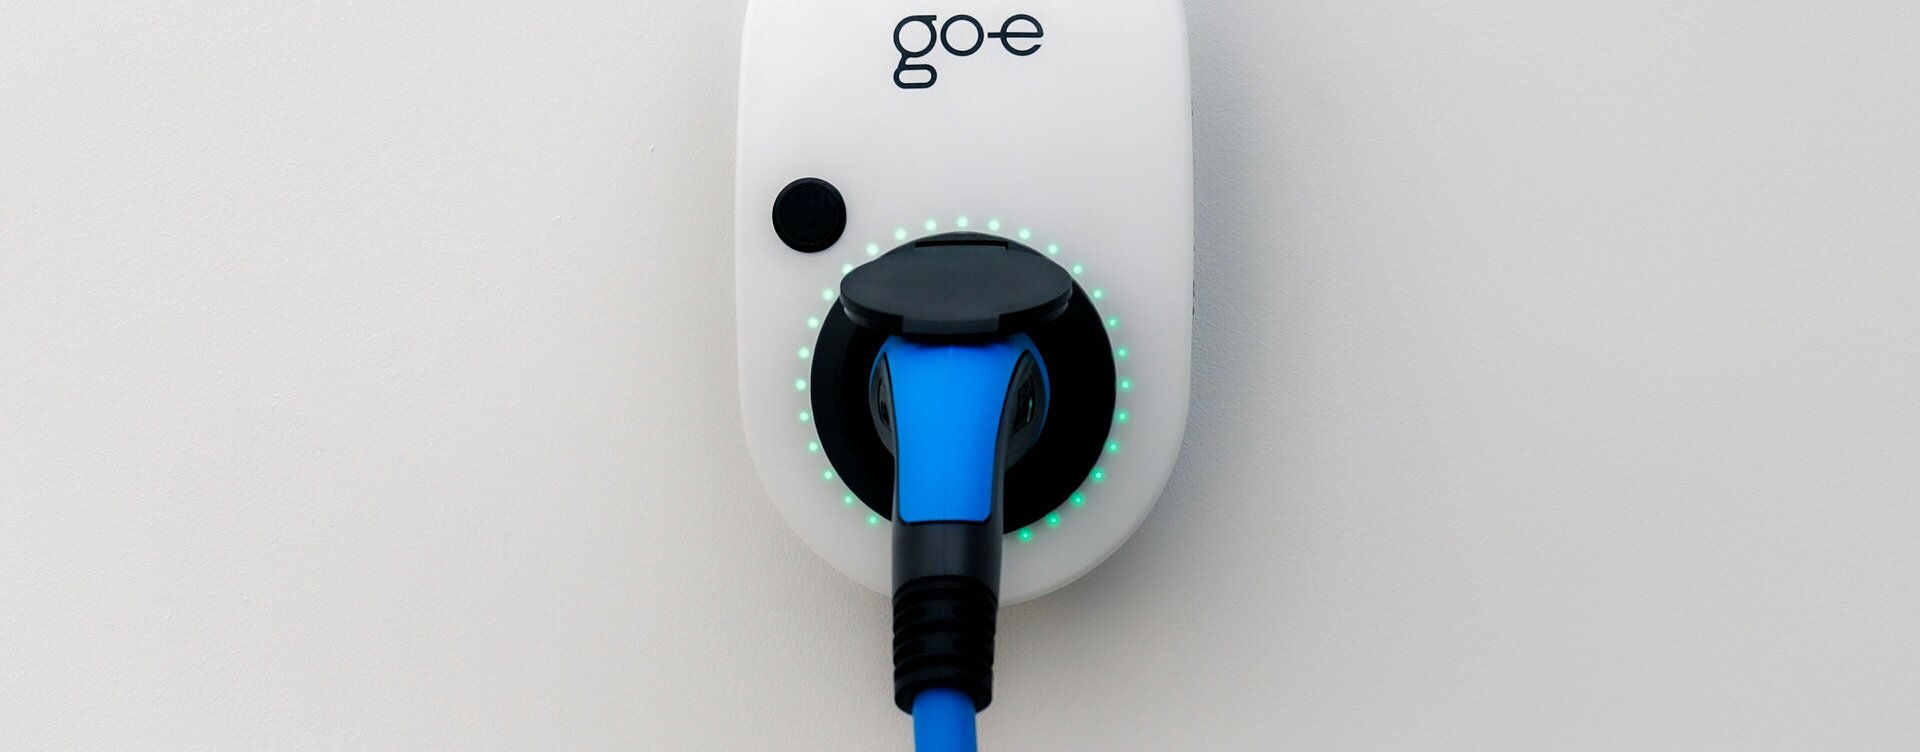 go-e Charger leds glow green